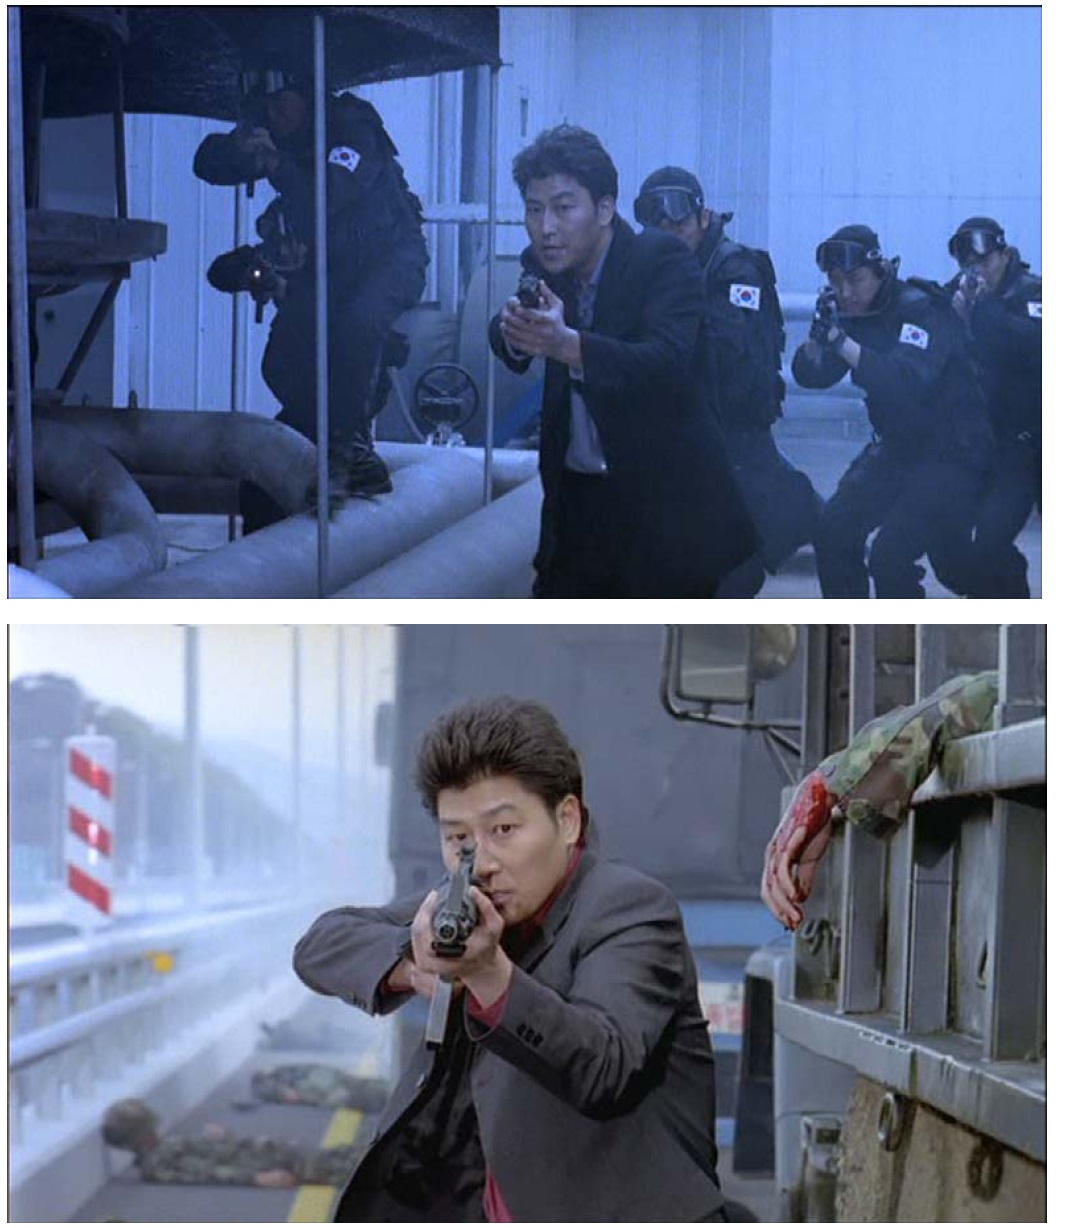 Film stills from the DVD Shiri (1999, Kang Je-gyu Films). Top: Special agent Lee leading a team of highly skilled officers on a raid; bottom: Lee (after repelling out of a hovering helicopter onto a bridge) pursuing heavily armed North Korean terrorist spies.